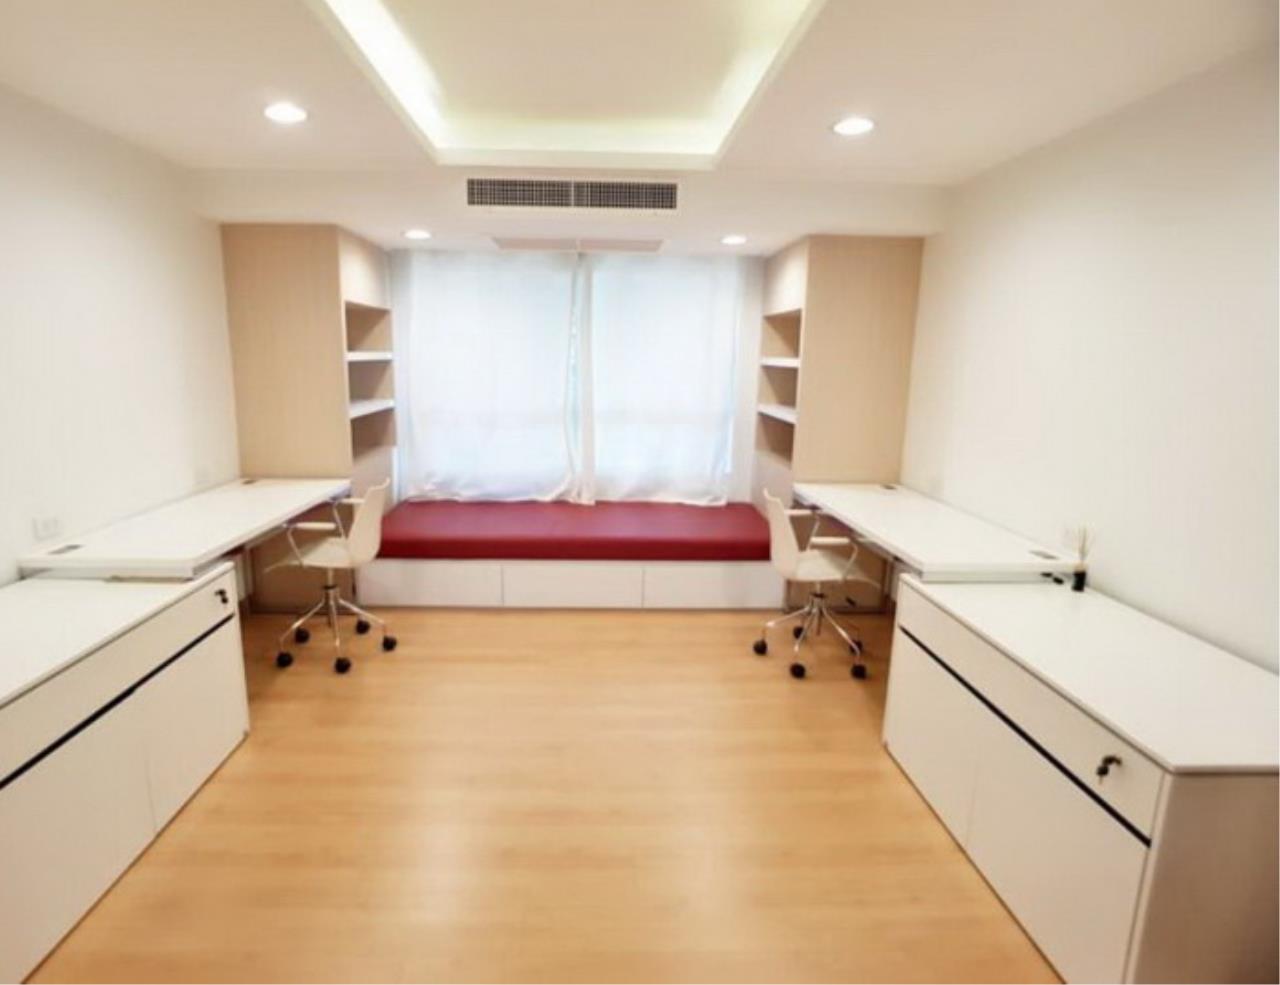 39474 - Sukhumvit 49 Rd Townhome For Rent useable area 266 Sqm, ภาพที่ 4